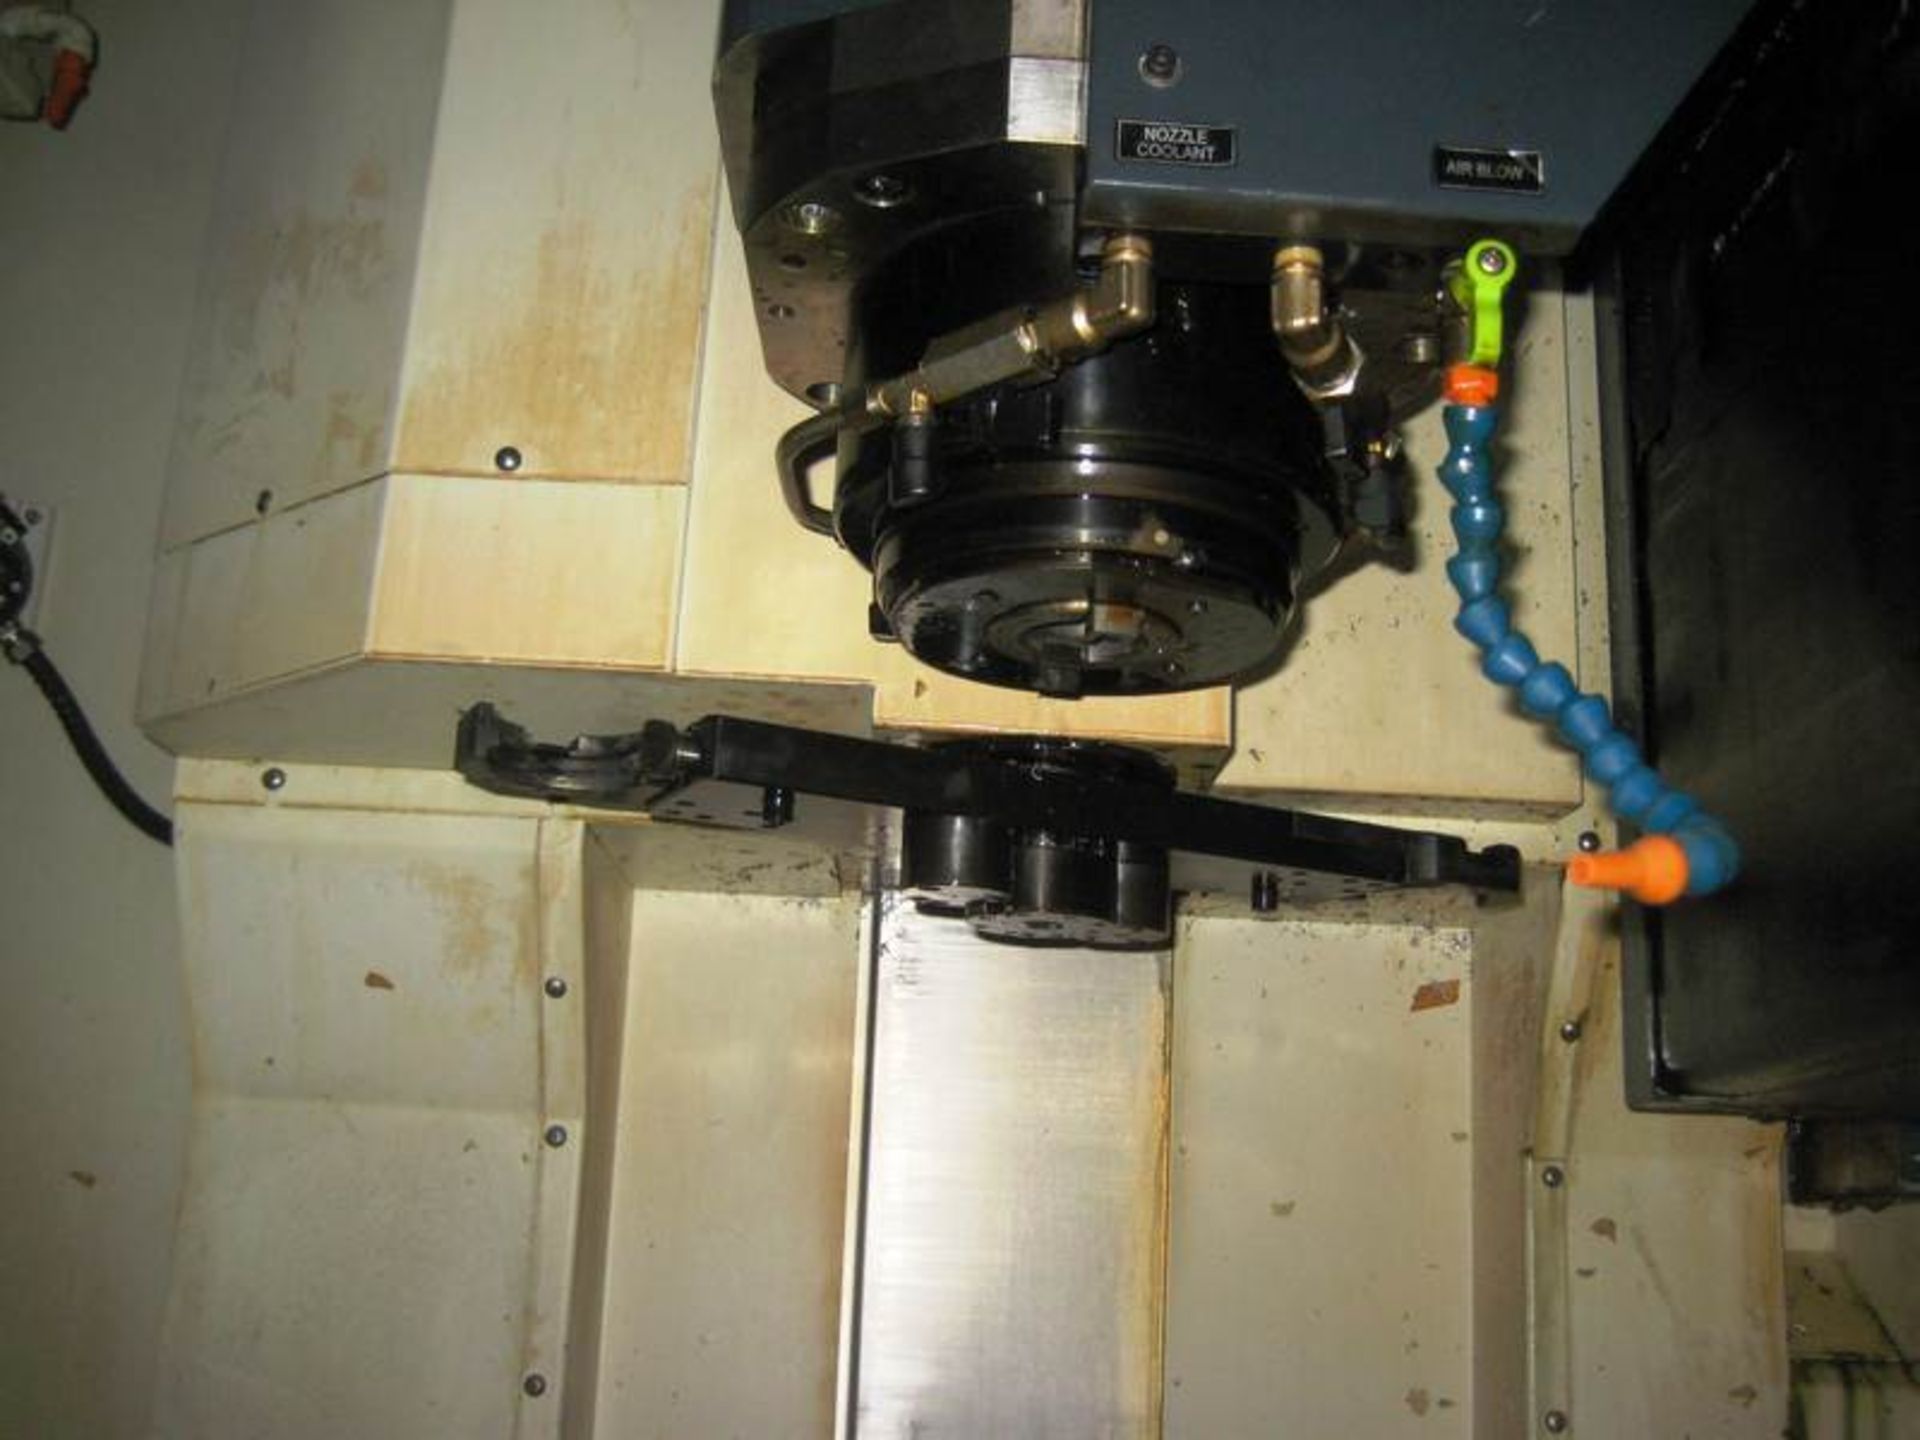 Makino S33-APC 3-Axis PRecision CNC Vertical Machining Center with Pallet Changer, S/N V100144, - Image 4 of 15